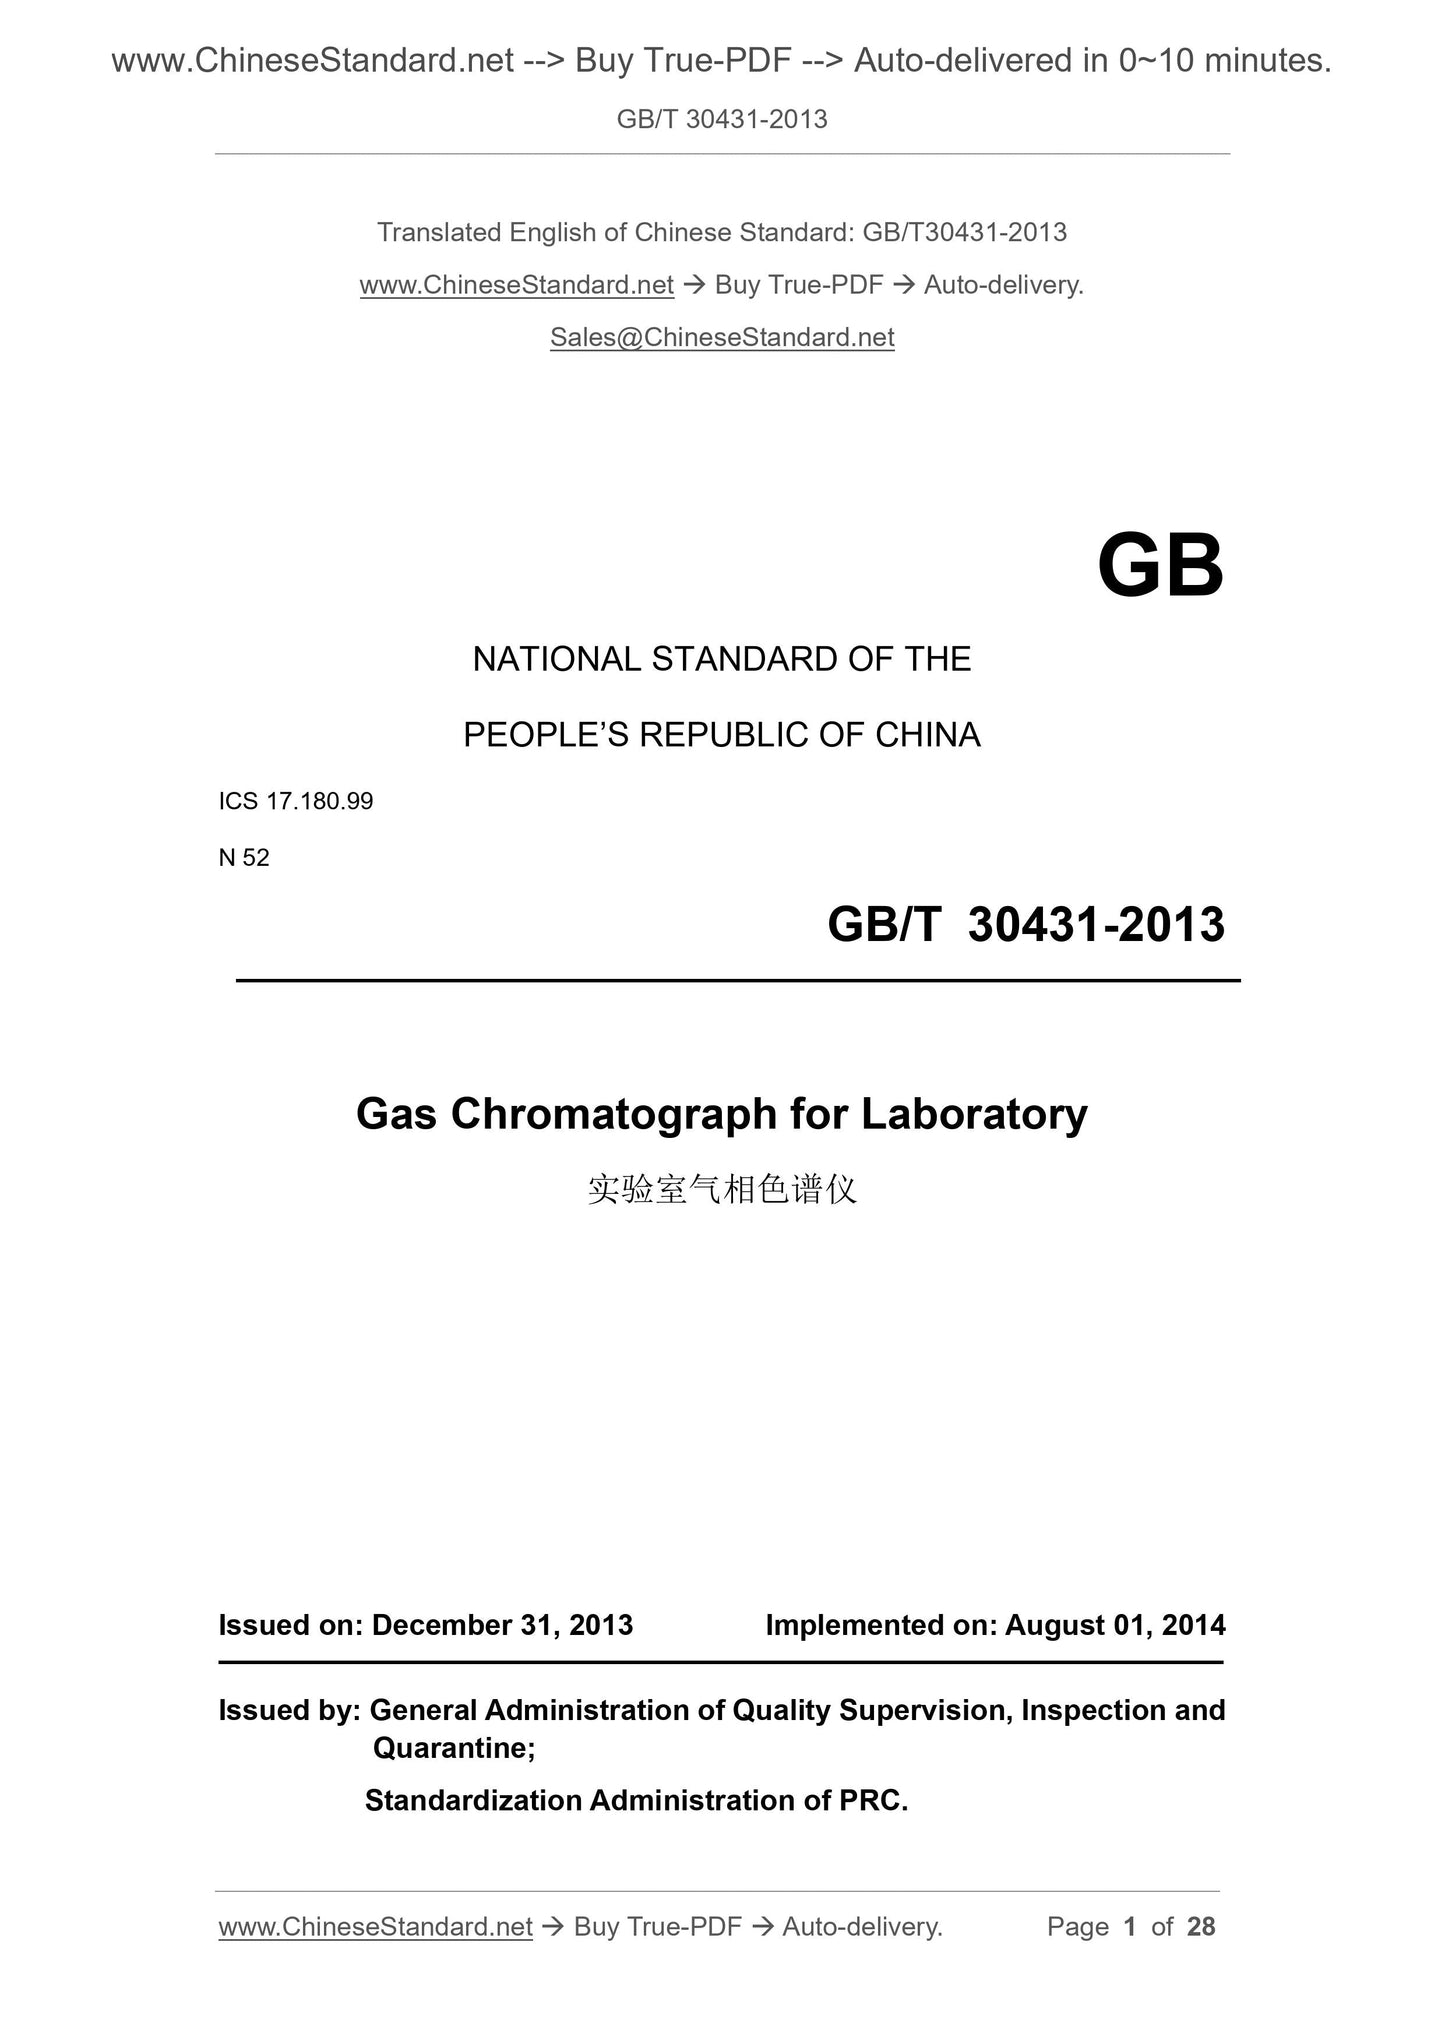 GB/T 30431-2013 Page 1